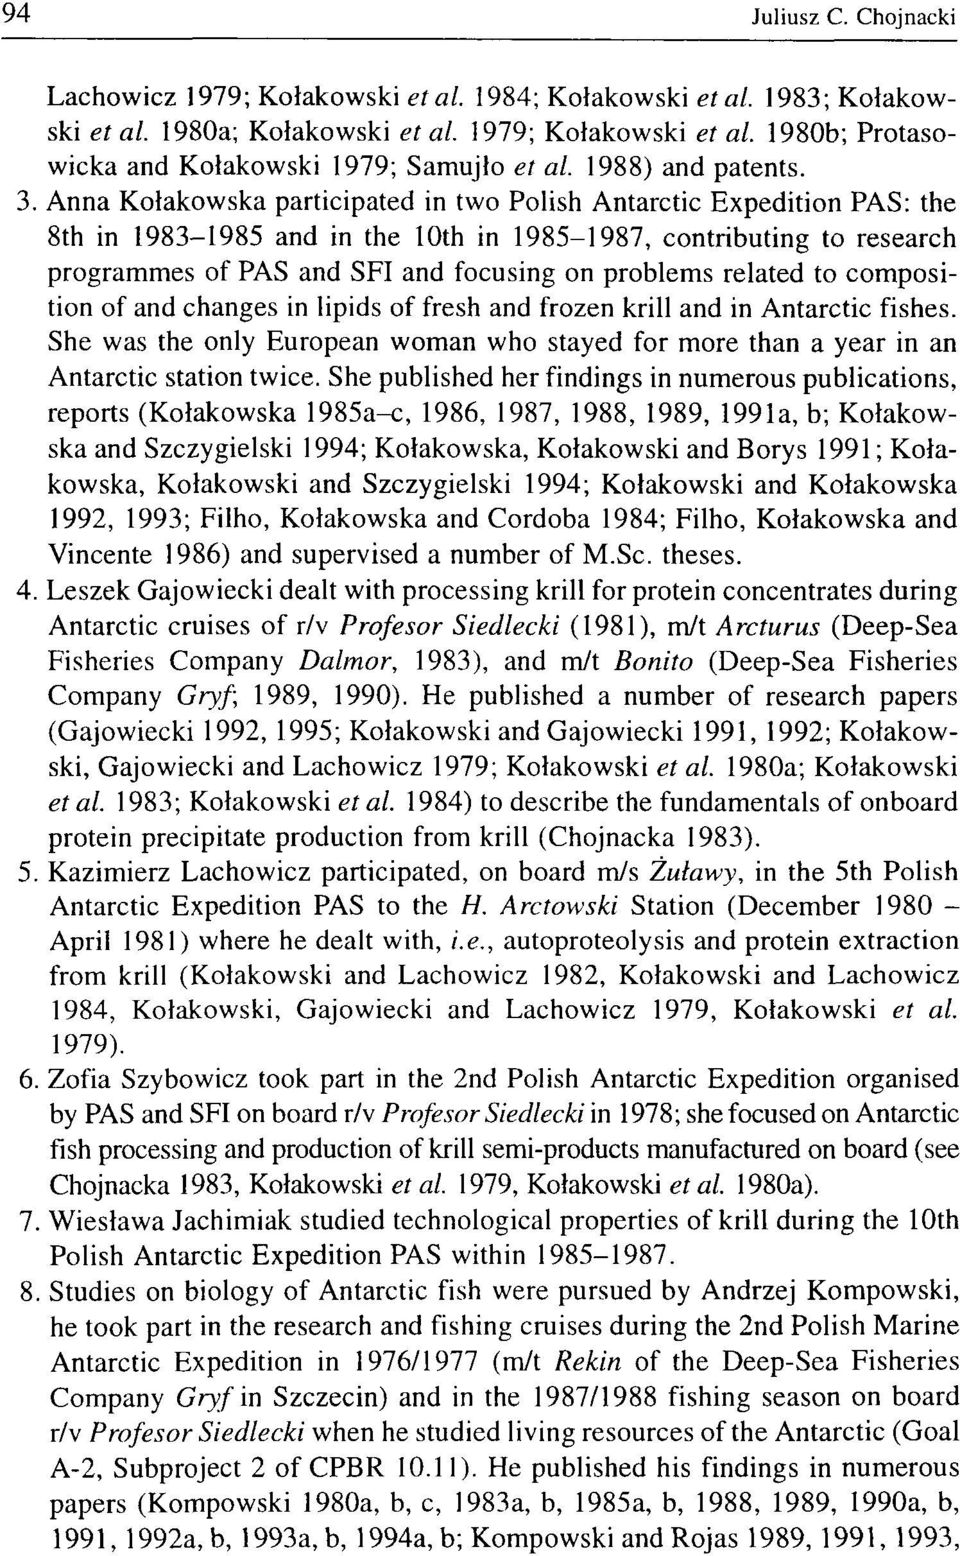 Anna Kołakowska participated in two Polish Antarctic Expedition PAS: the 8th in 1983-1985 and in the 10th in 1985-1987, contributing to research programmes of PAS and SFI and focusing on problems